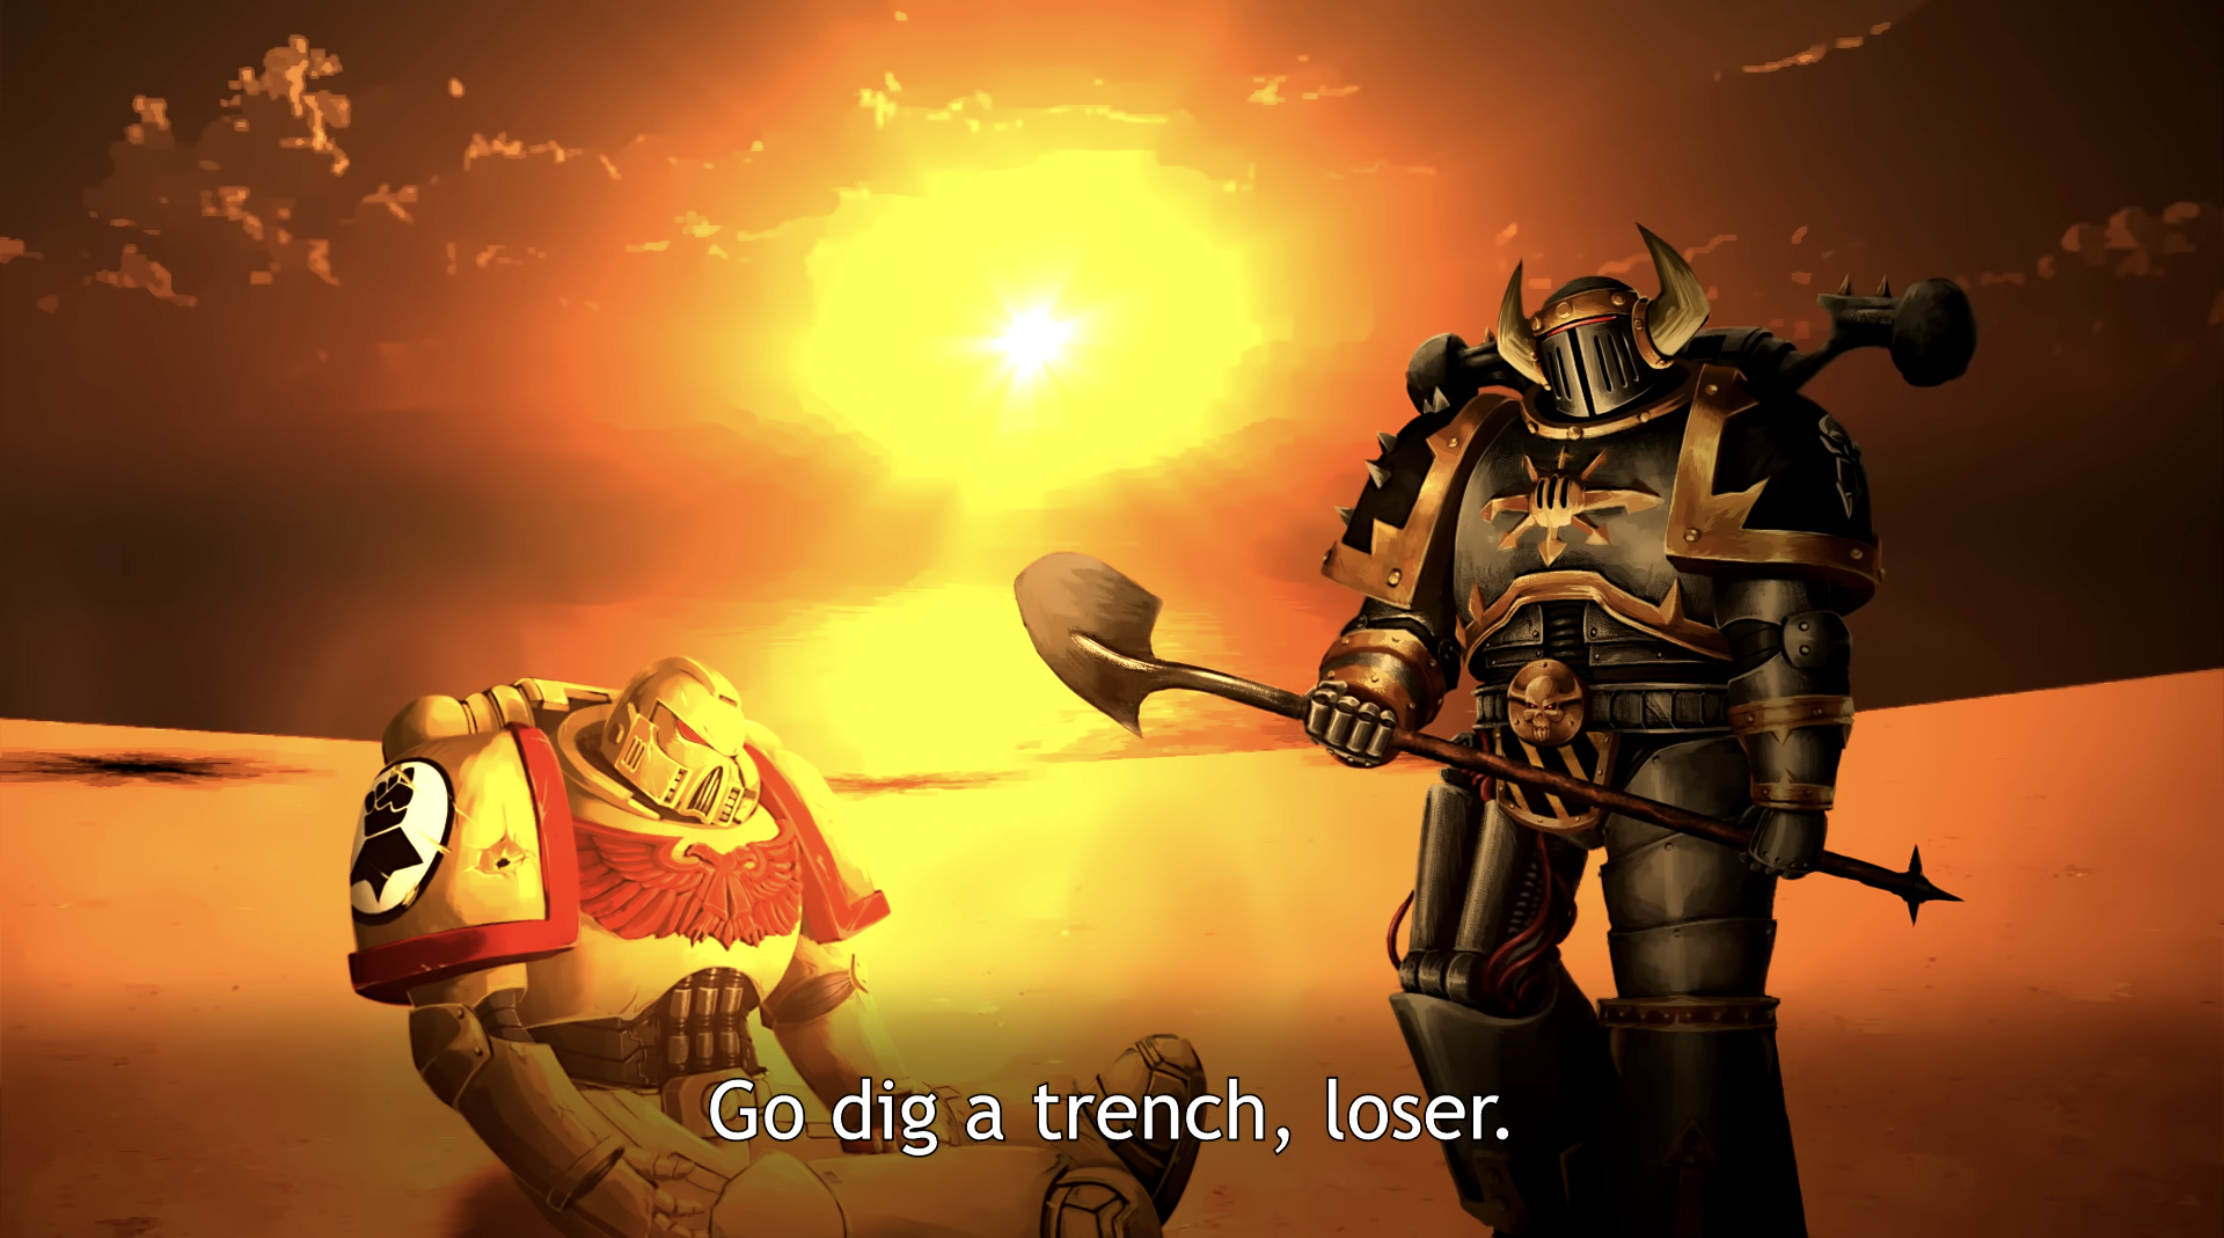 Go dig a trench, loser. Blank Meme Template